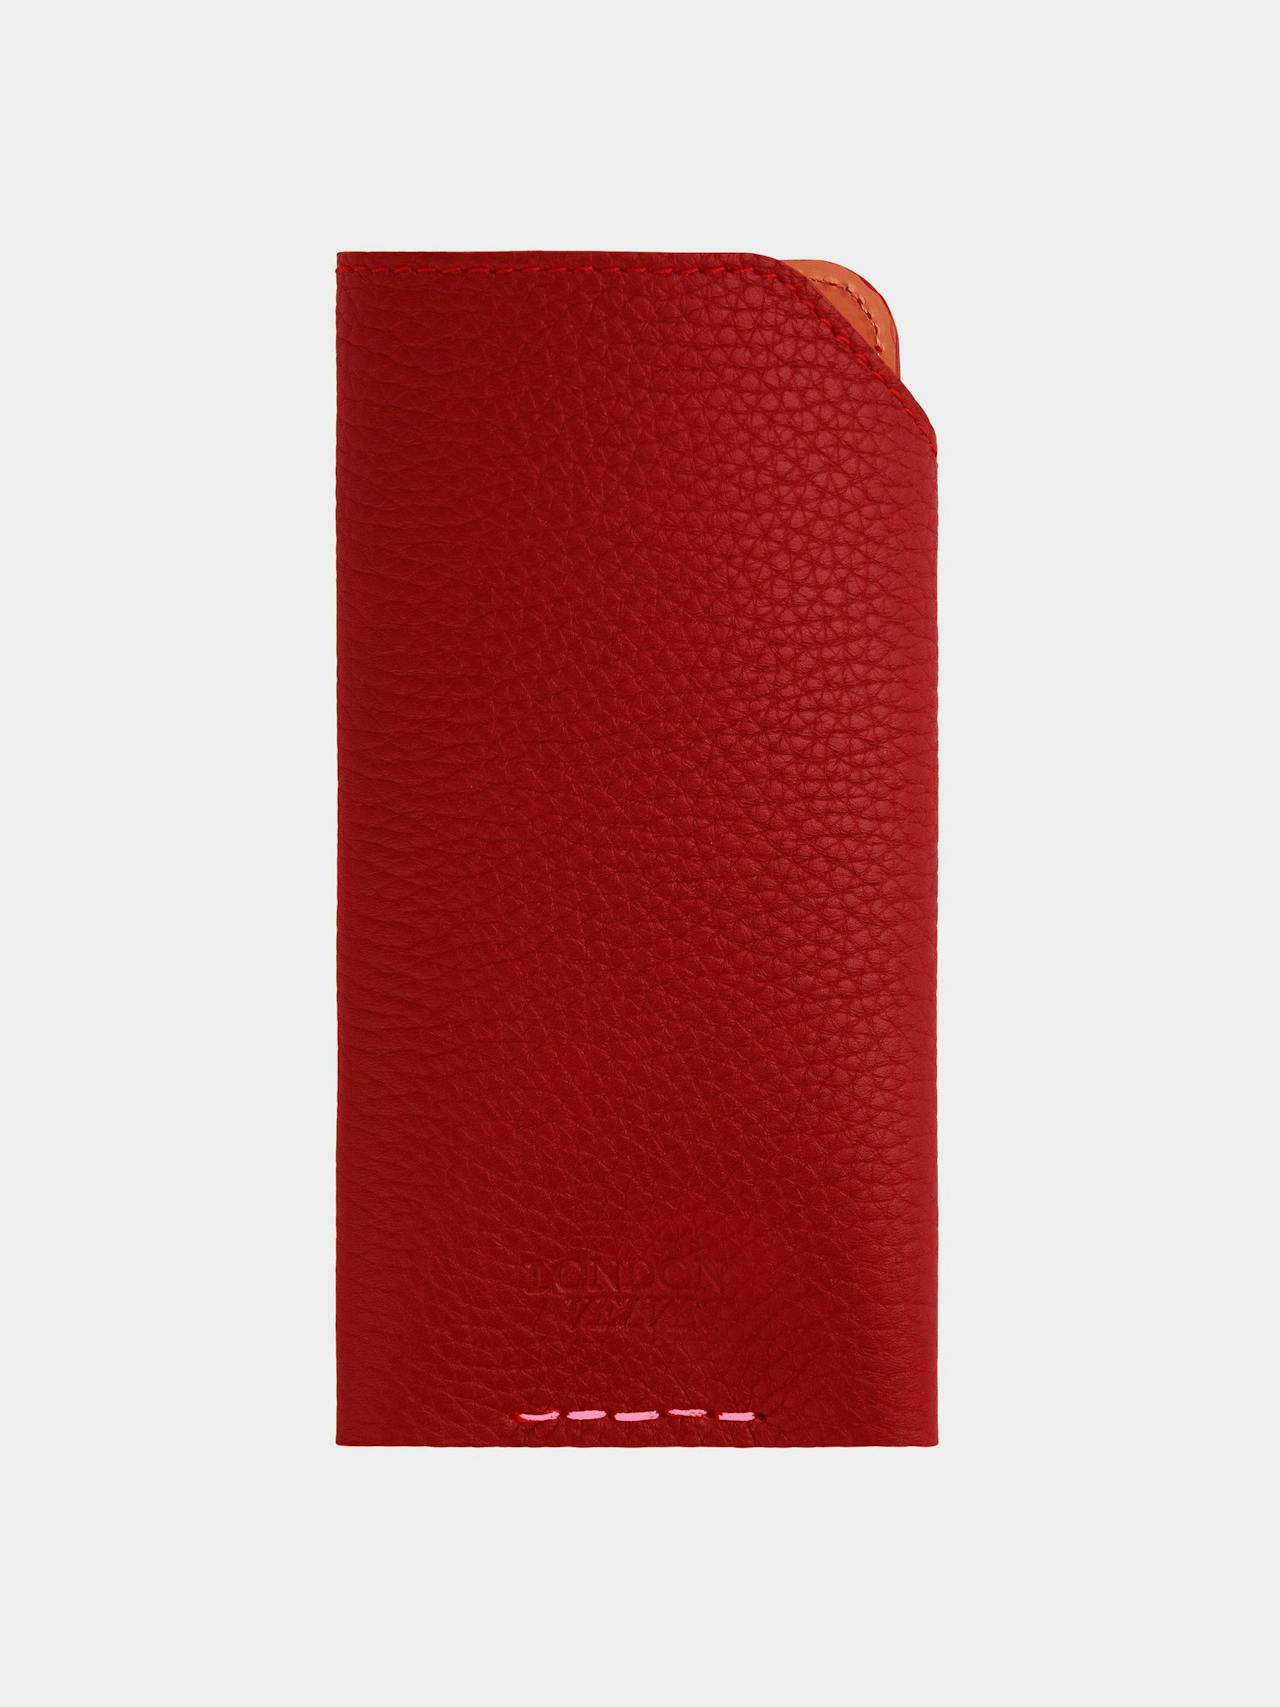 The bright red glasses case